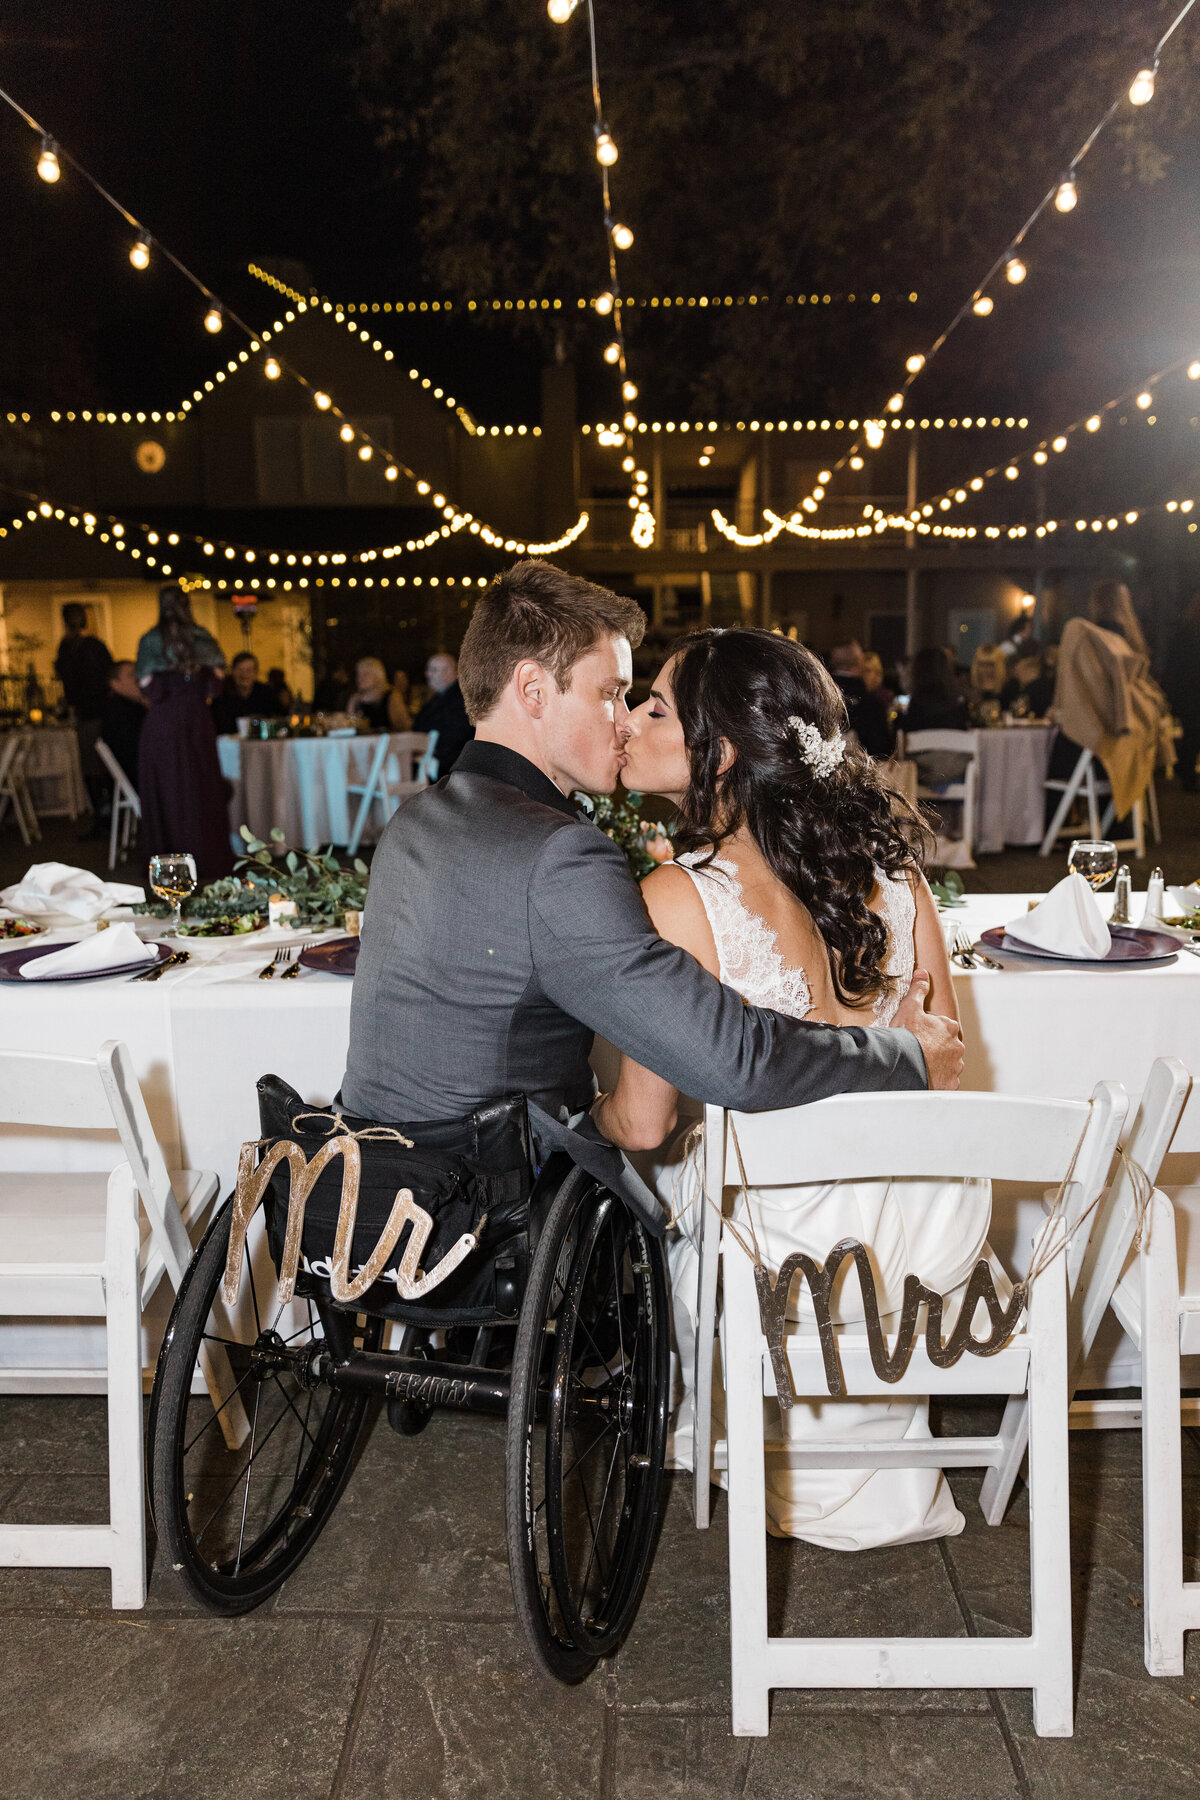 A portrait of a bride and groom sharing a kiss at their head table during their wedding reception in Dallas, Texas. The bride is on the right and is wearing a intricate white dress and a hairpiece. The groom is on the left and is wearing a grey suit. The bride is seated in a white chair with a "Mrs." sign hanging off the back while the groom is seated in his wheelchair with a "Mr." sign hanging off the back. In the background, many strands of cafe lights crisscross overhead of all the guests and their reception tables.